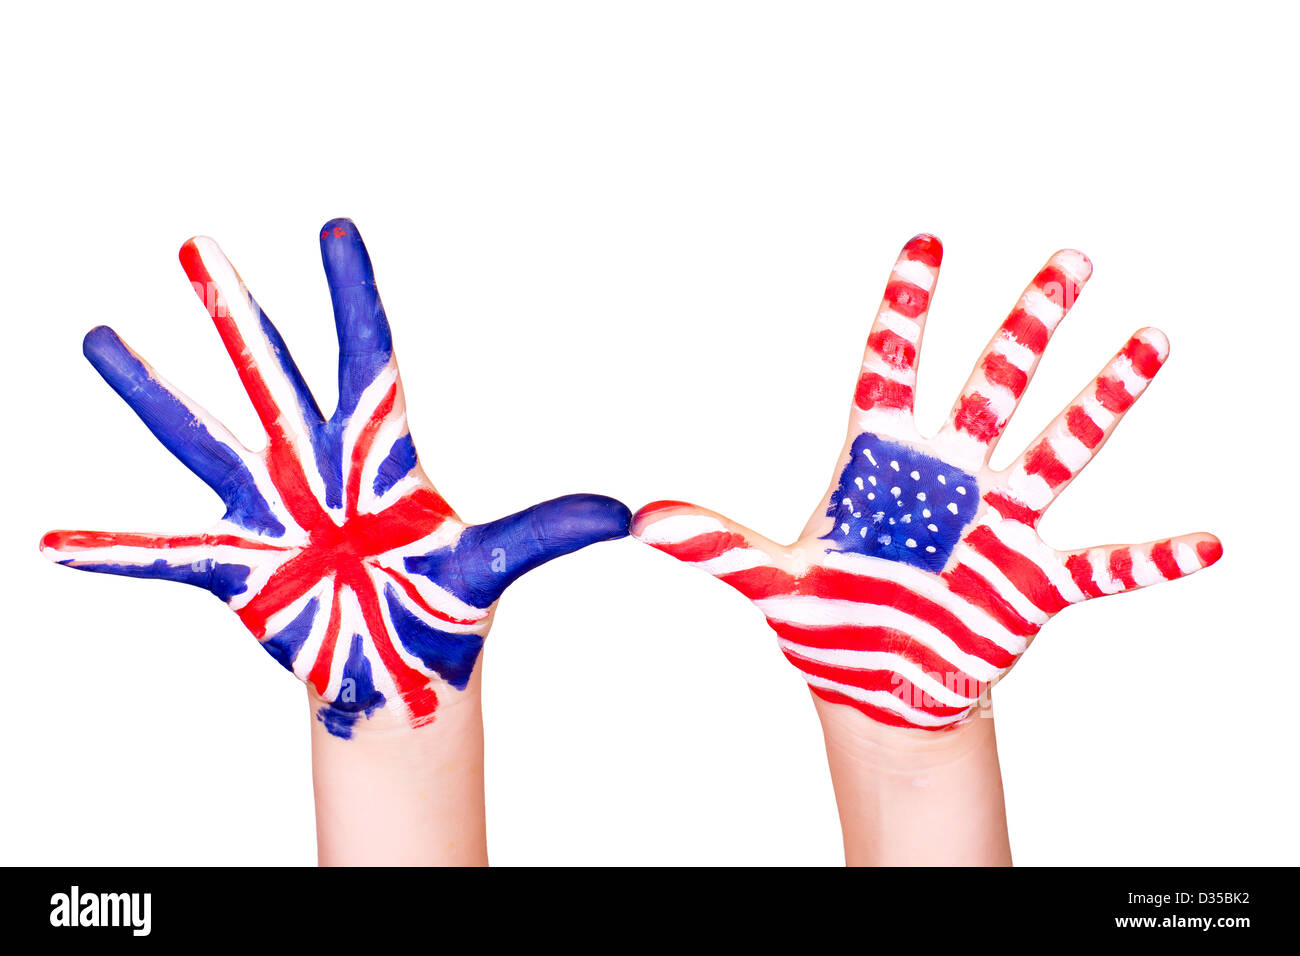 American and English flags on hands. Learning English language concept. Stock Photo